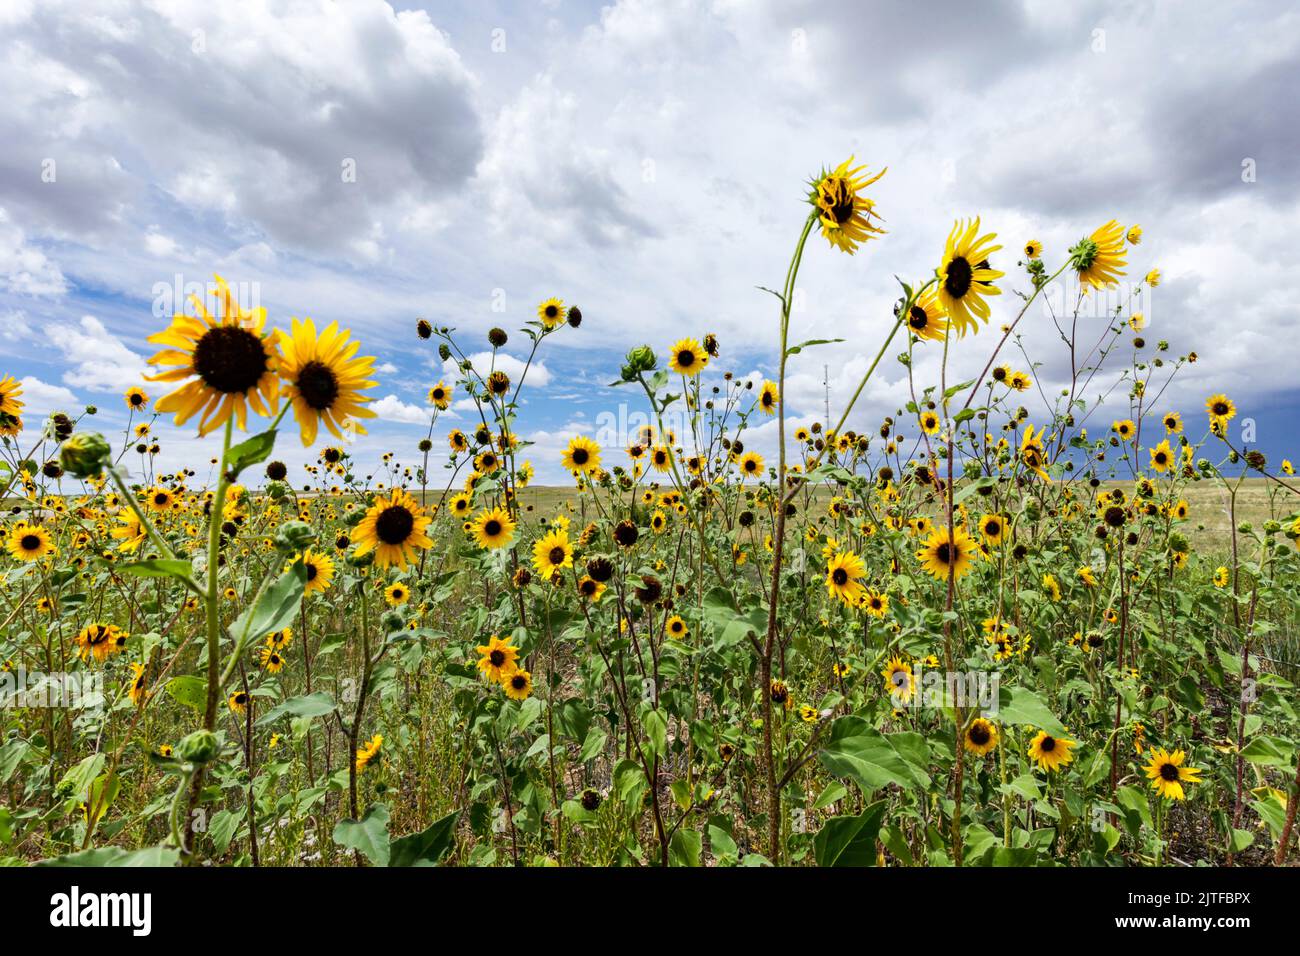 Panhandle, Texas, United States. Sunflowers in a field Stock Photo